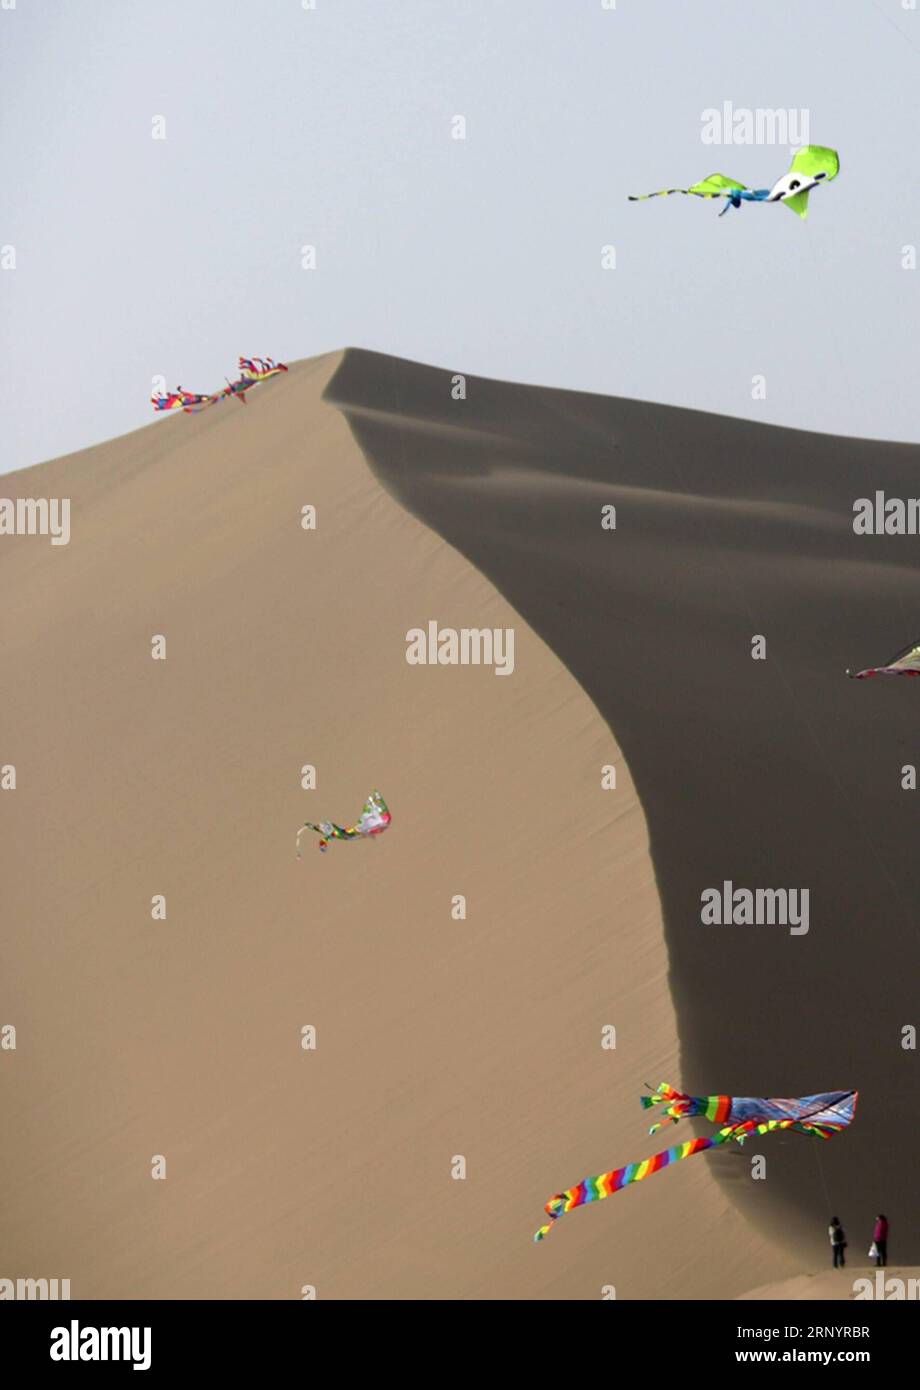 (180331) -- DUNHUANG, March 31, 2018 -- People fly kites at the scenic spot of the Crescent Spring, a crescent-shaped lake surrounded by deserts at the foot of the Mingsha Hill, in Dunhuang, northwest China s Gansu province, March 31, 2018. ) (dhf) CHINA-GANSU-DUNHUANG-KITE (CN) ZhangxXiaoliang PUBLICATIONxNOTxINxCHN Stock Photo